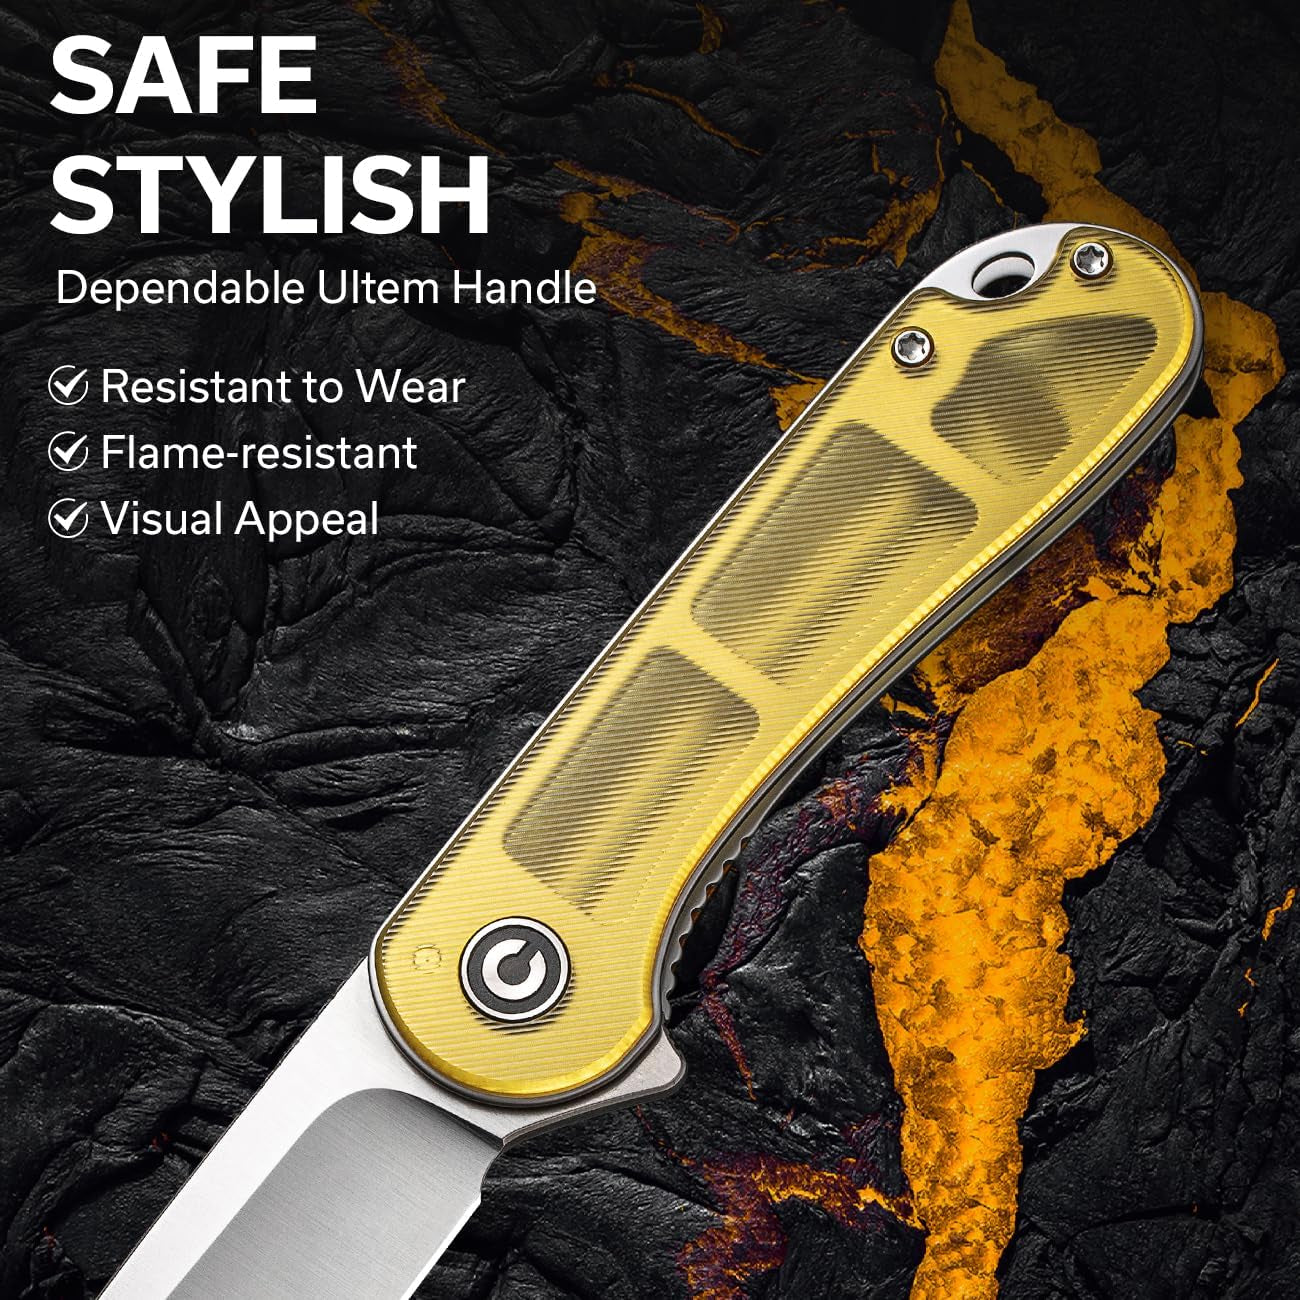 Elementum Folding Knife with 2.96" D2 Blade